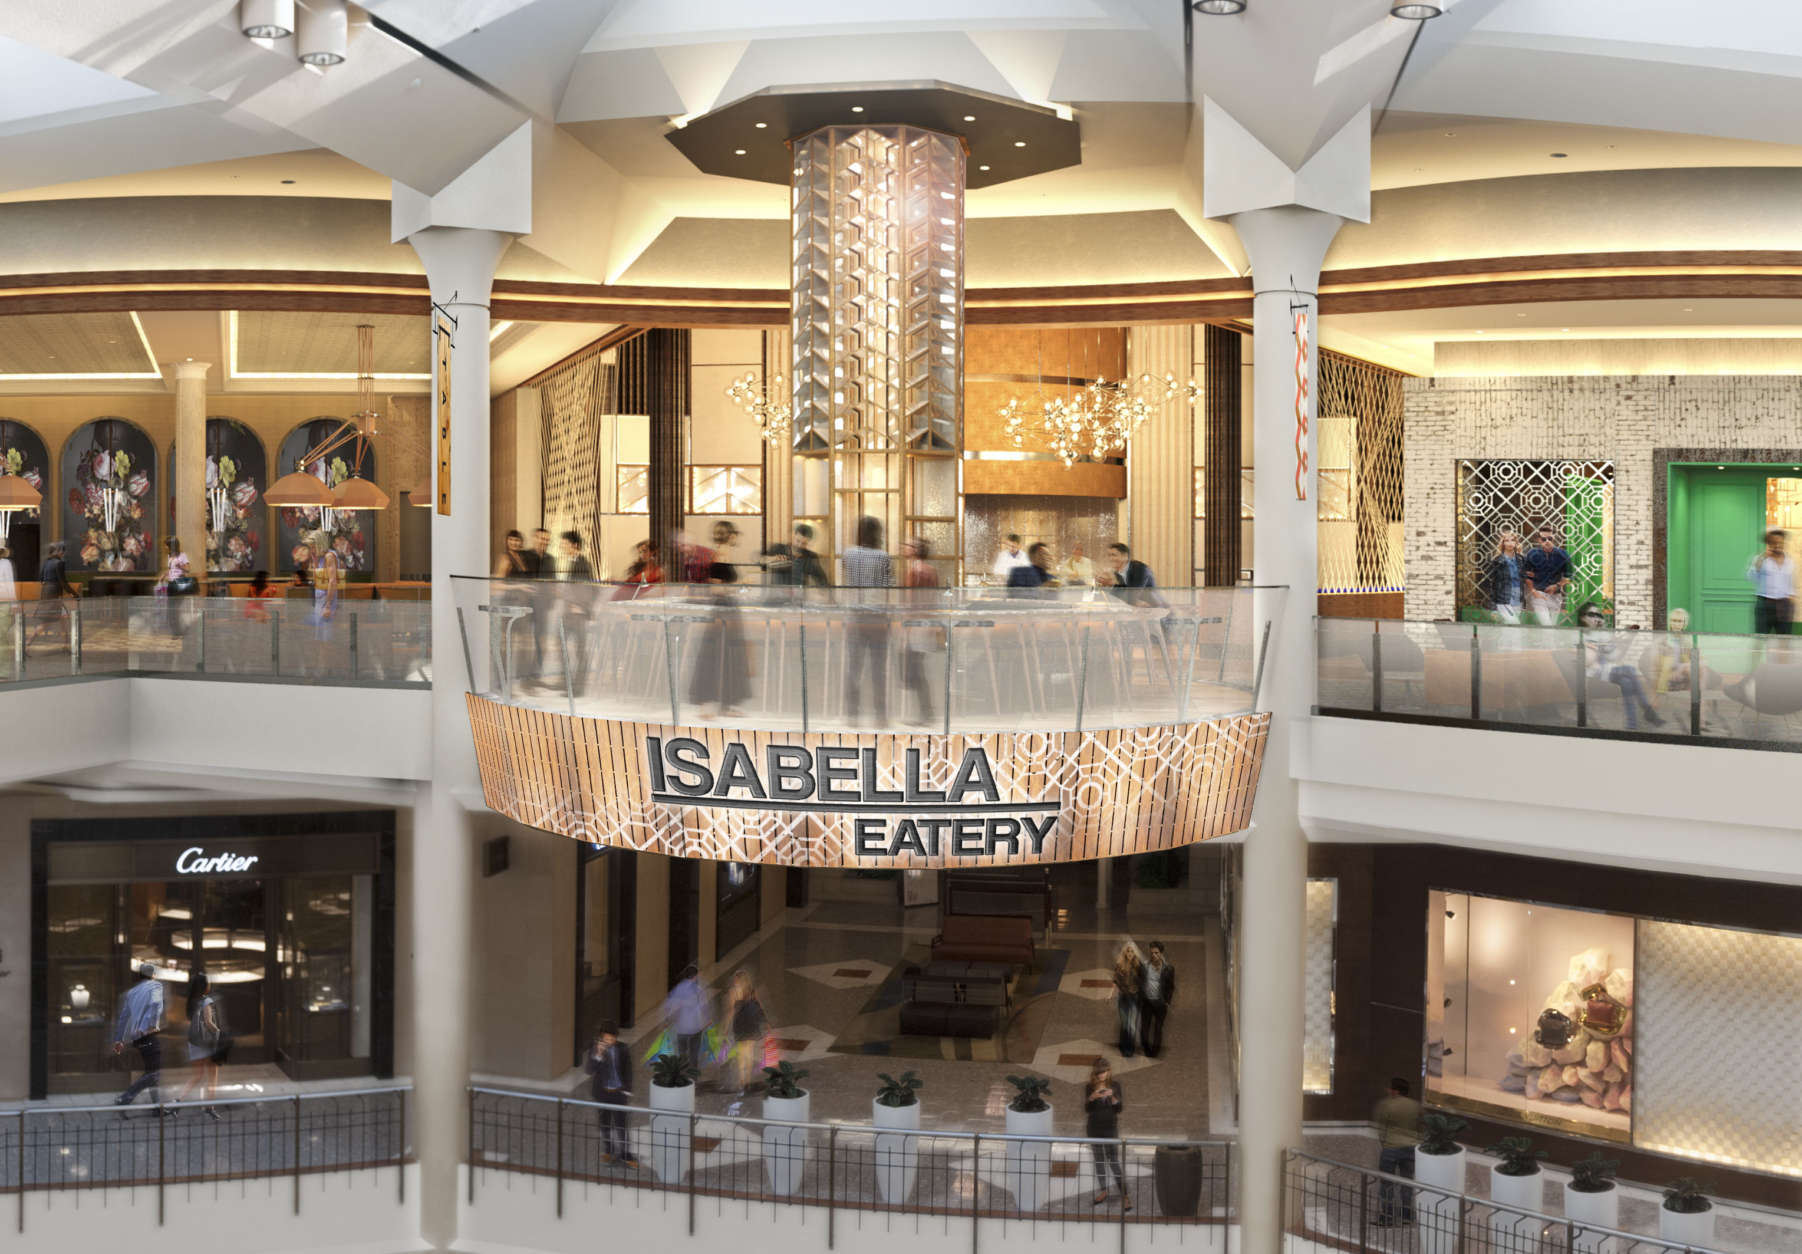 Mike Isabella's Tysons Galleria food hall Isabella Eatery to close for good  - Washington Business Journal